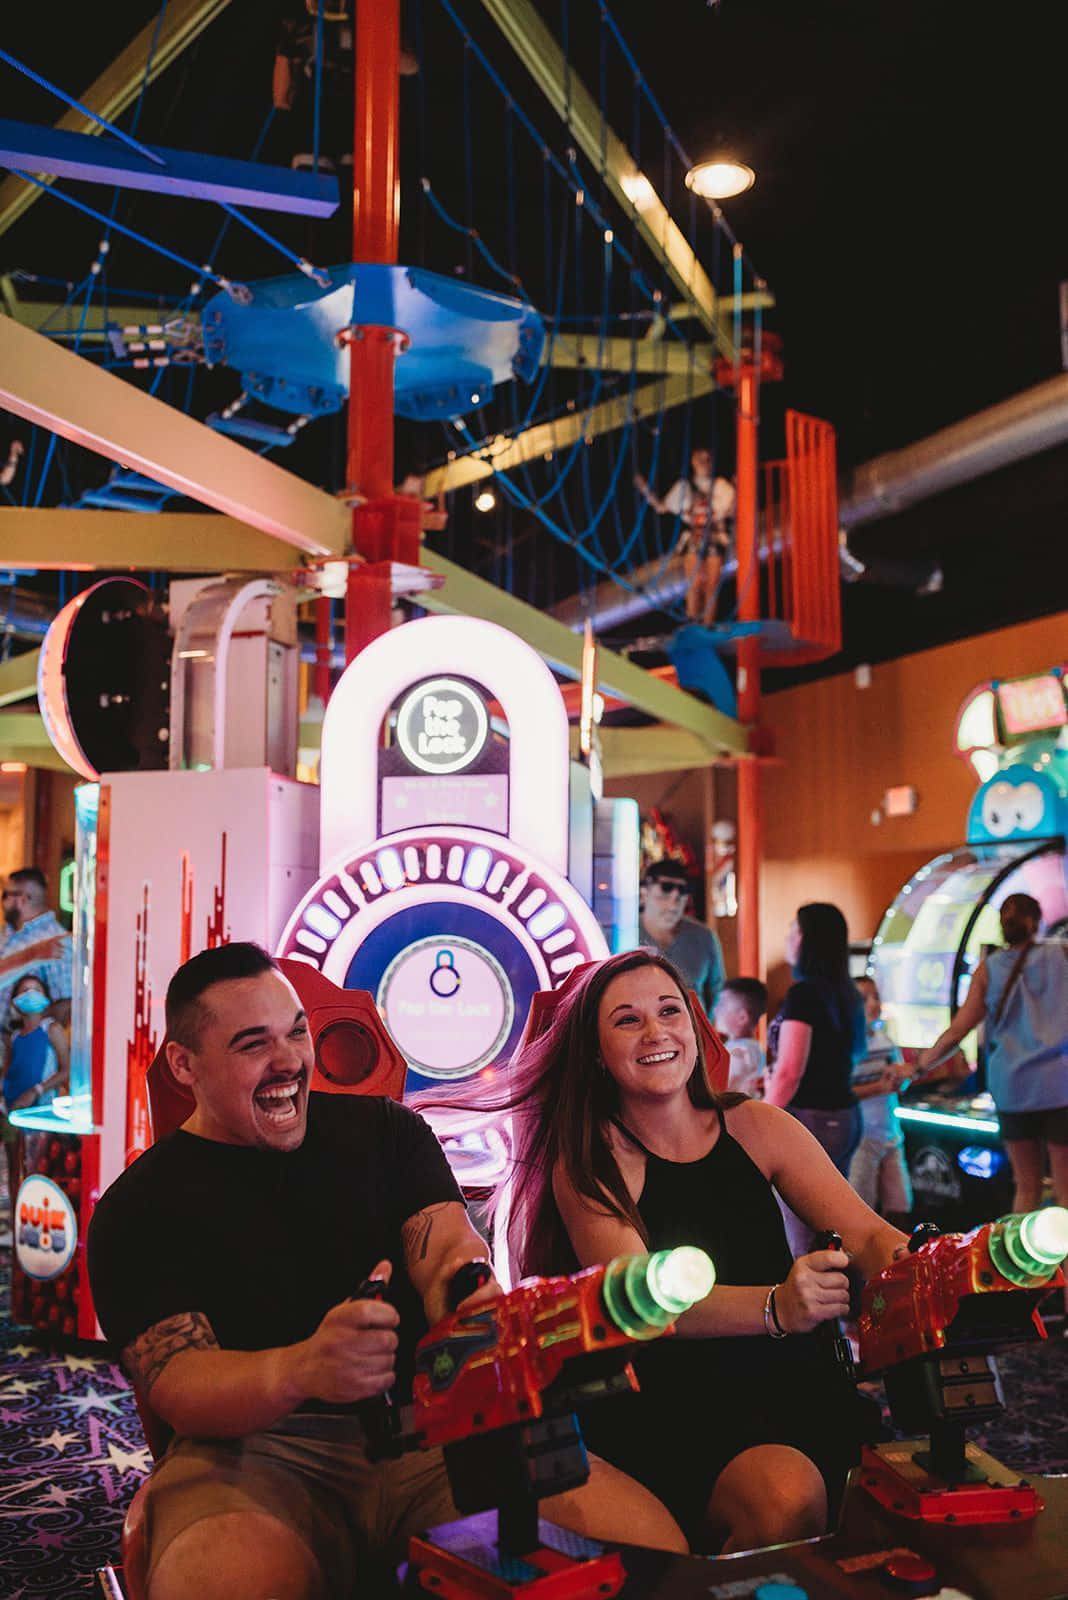 Couple Playing Arcade At Carnival Picture